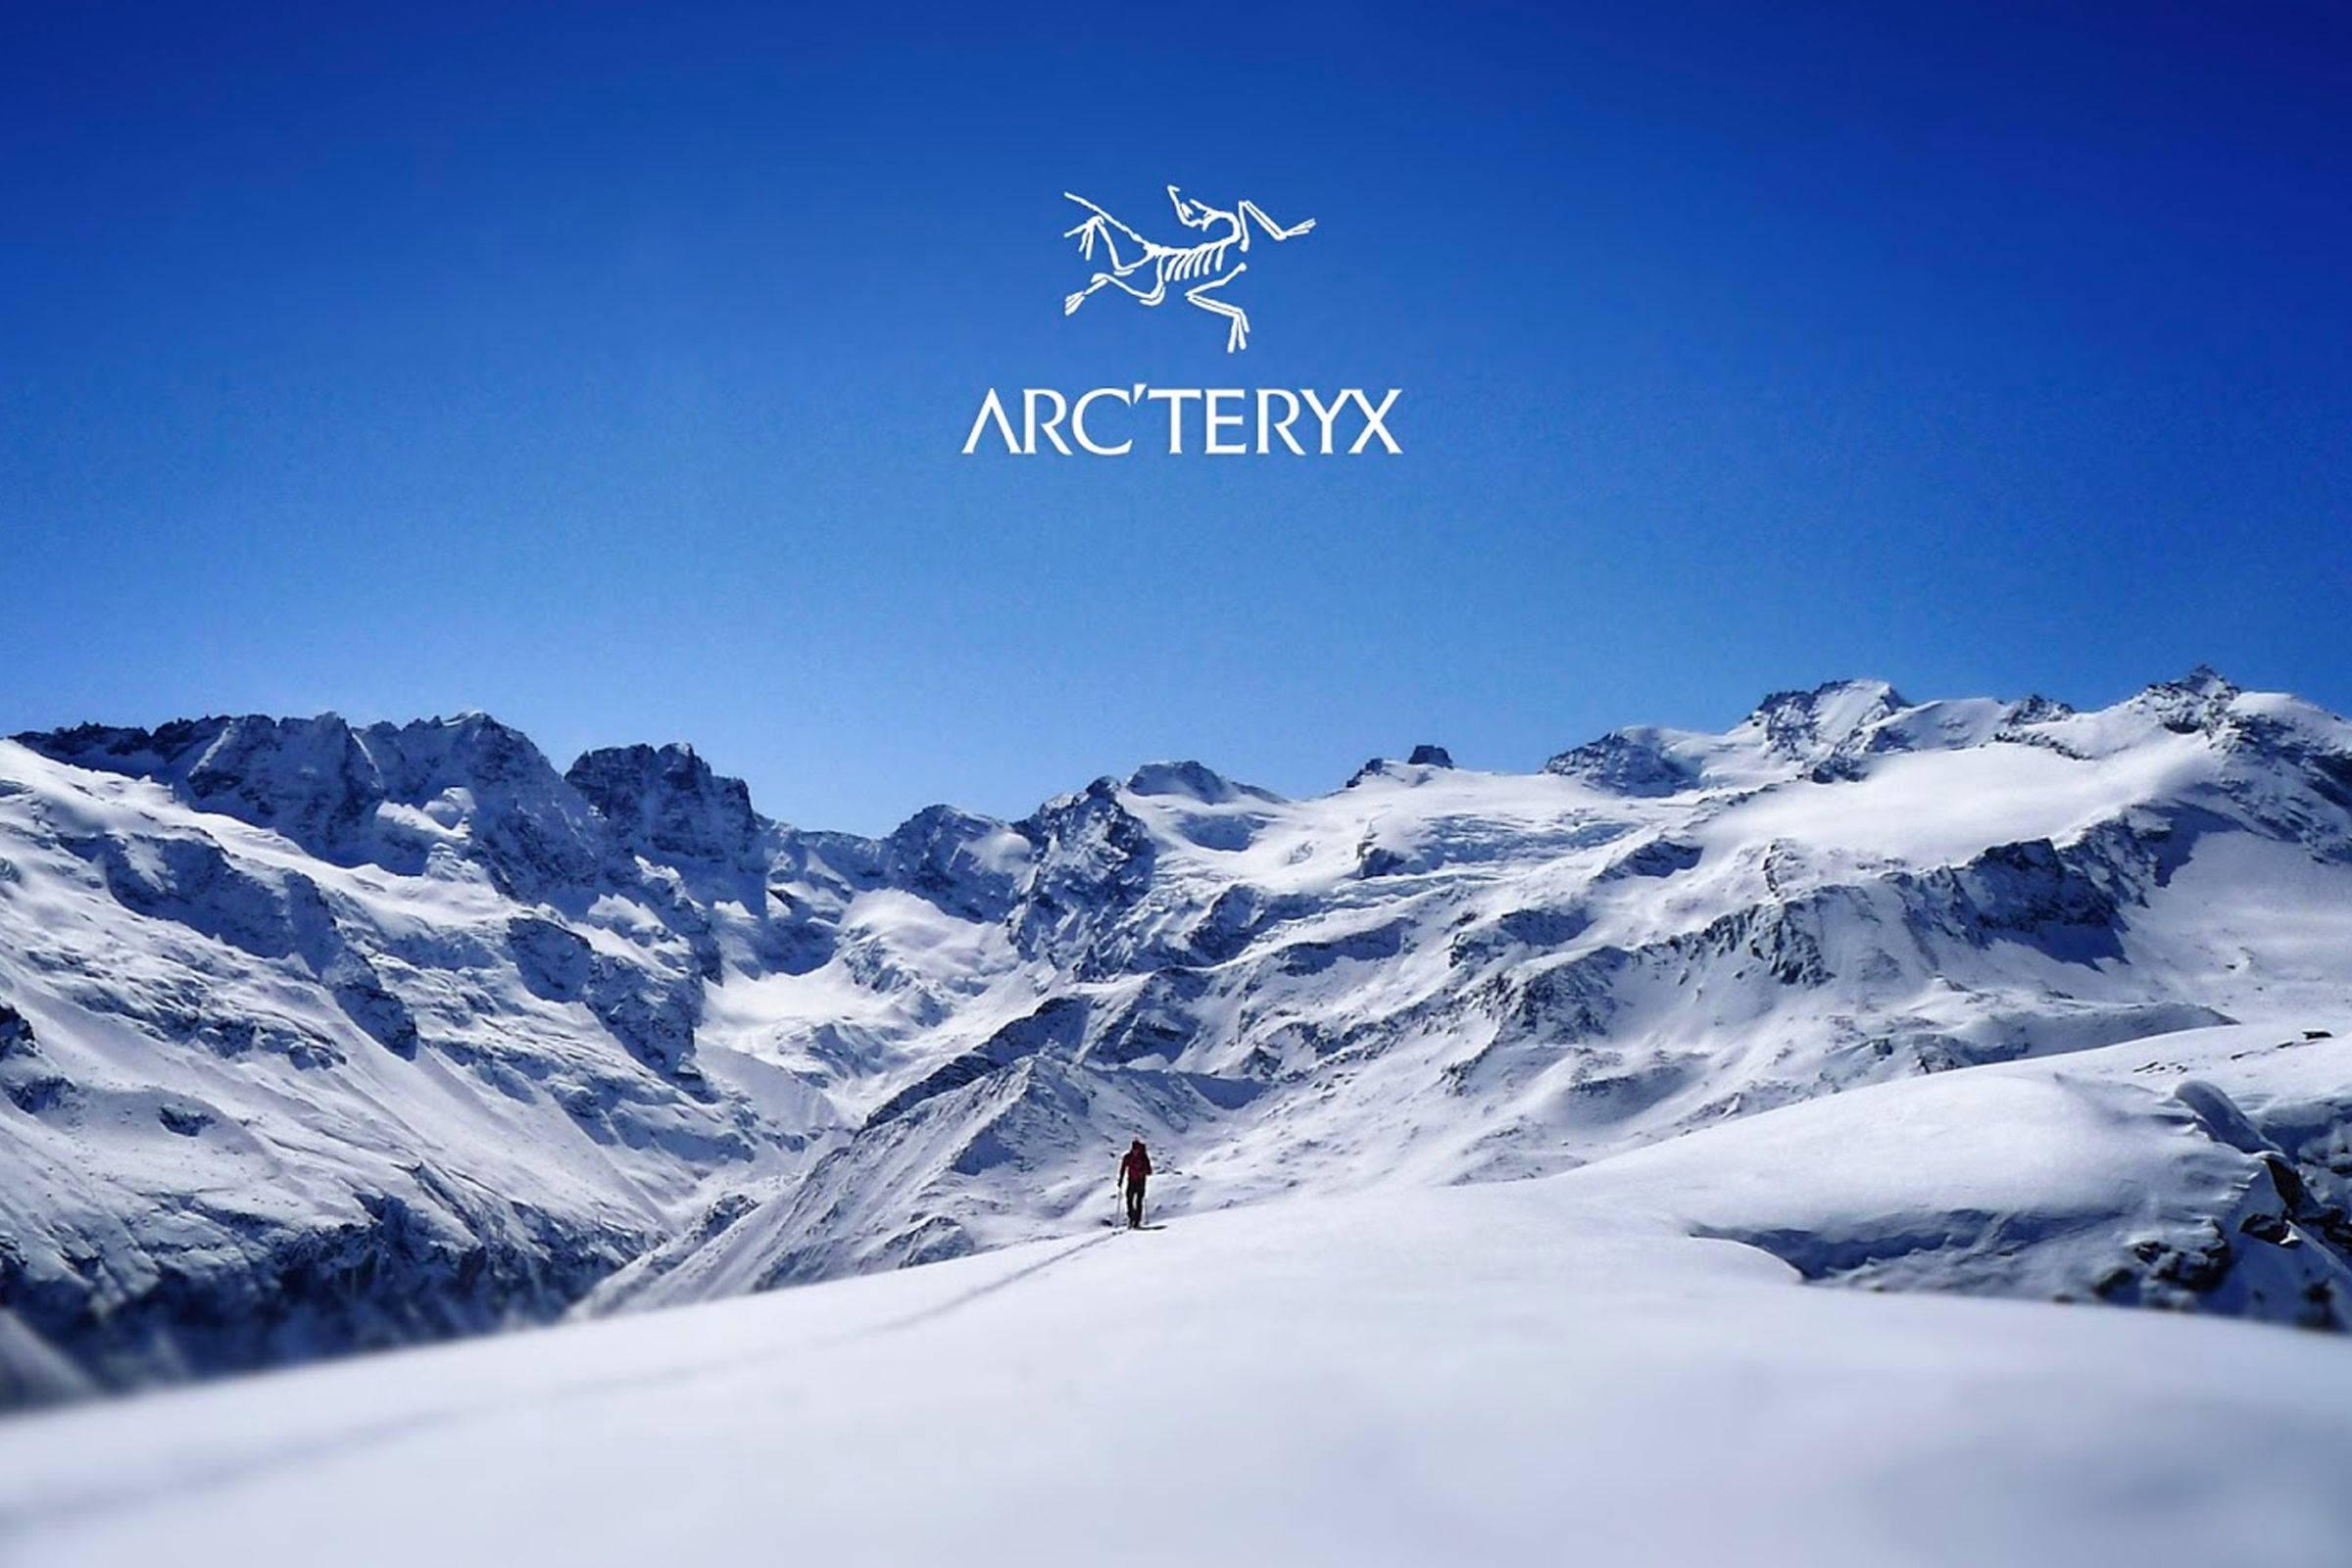 A Guide to Arc’teryx: One Fossil, Many Forms